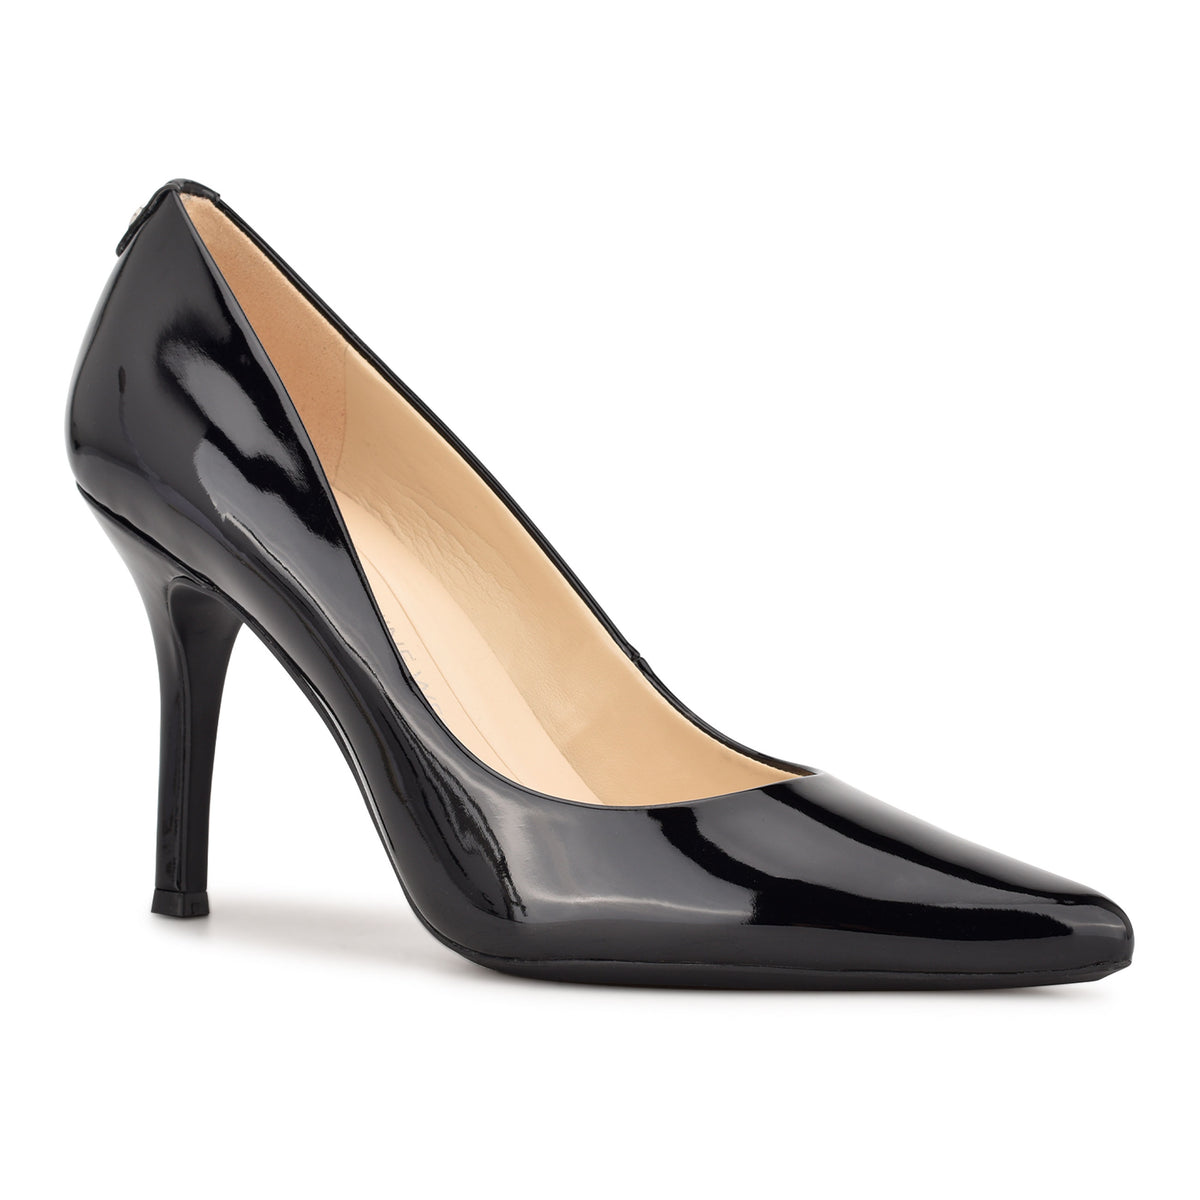 Fifth 9x9 Pointy Toe Pumps